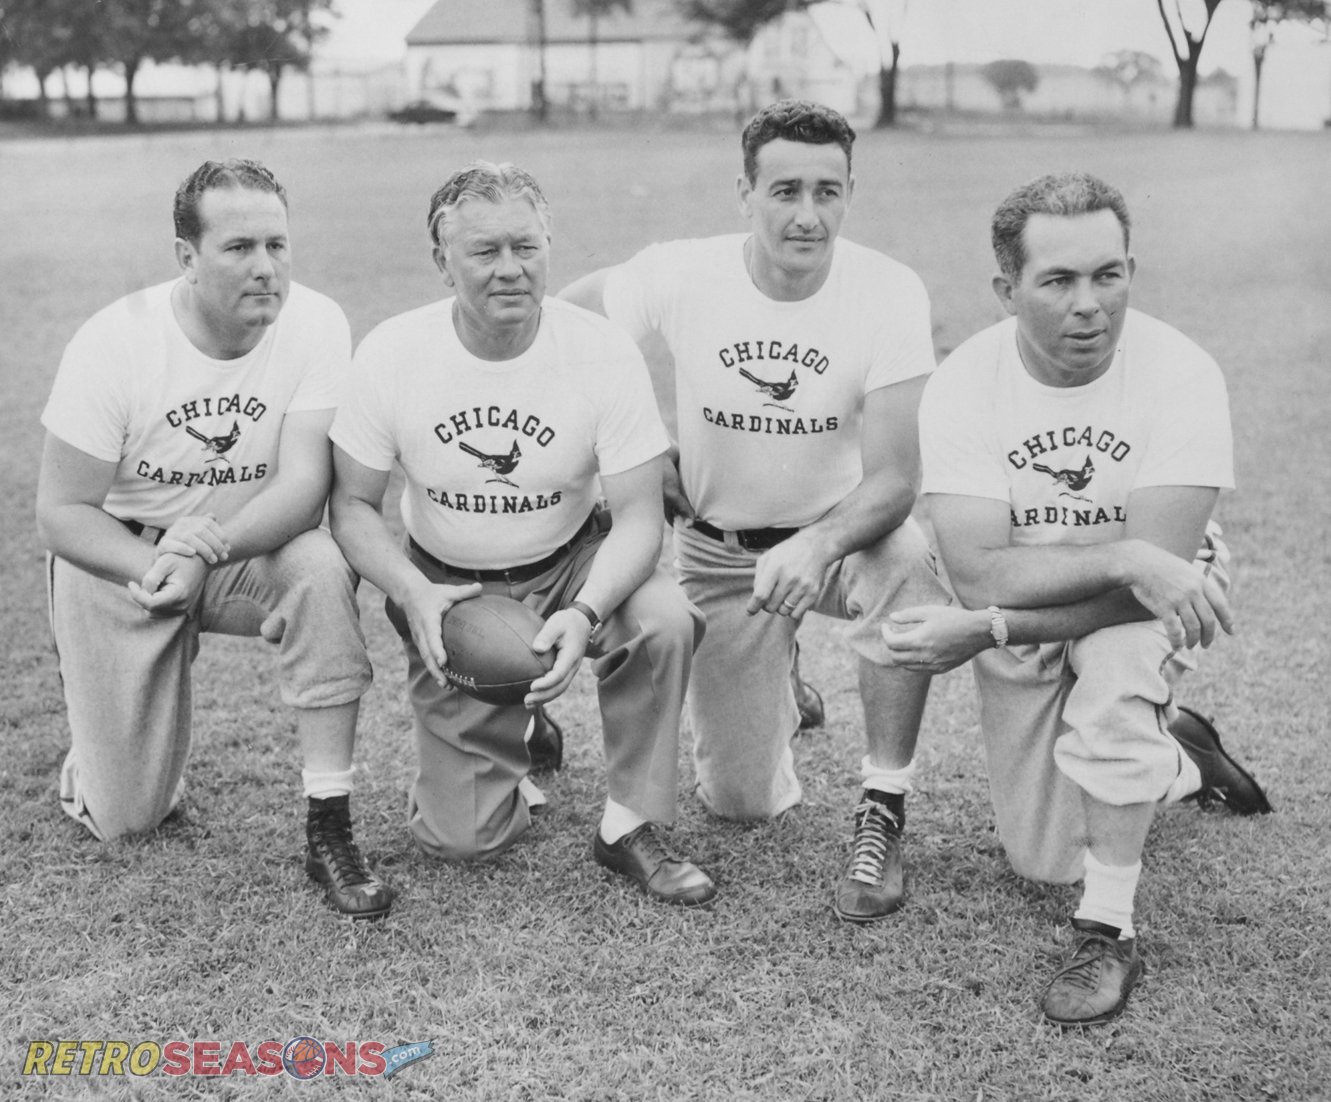 The Chicago Cardinals